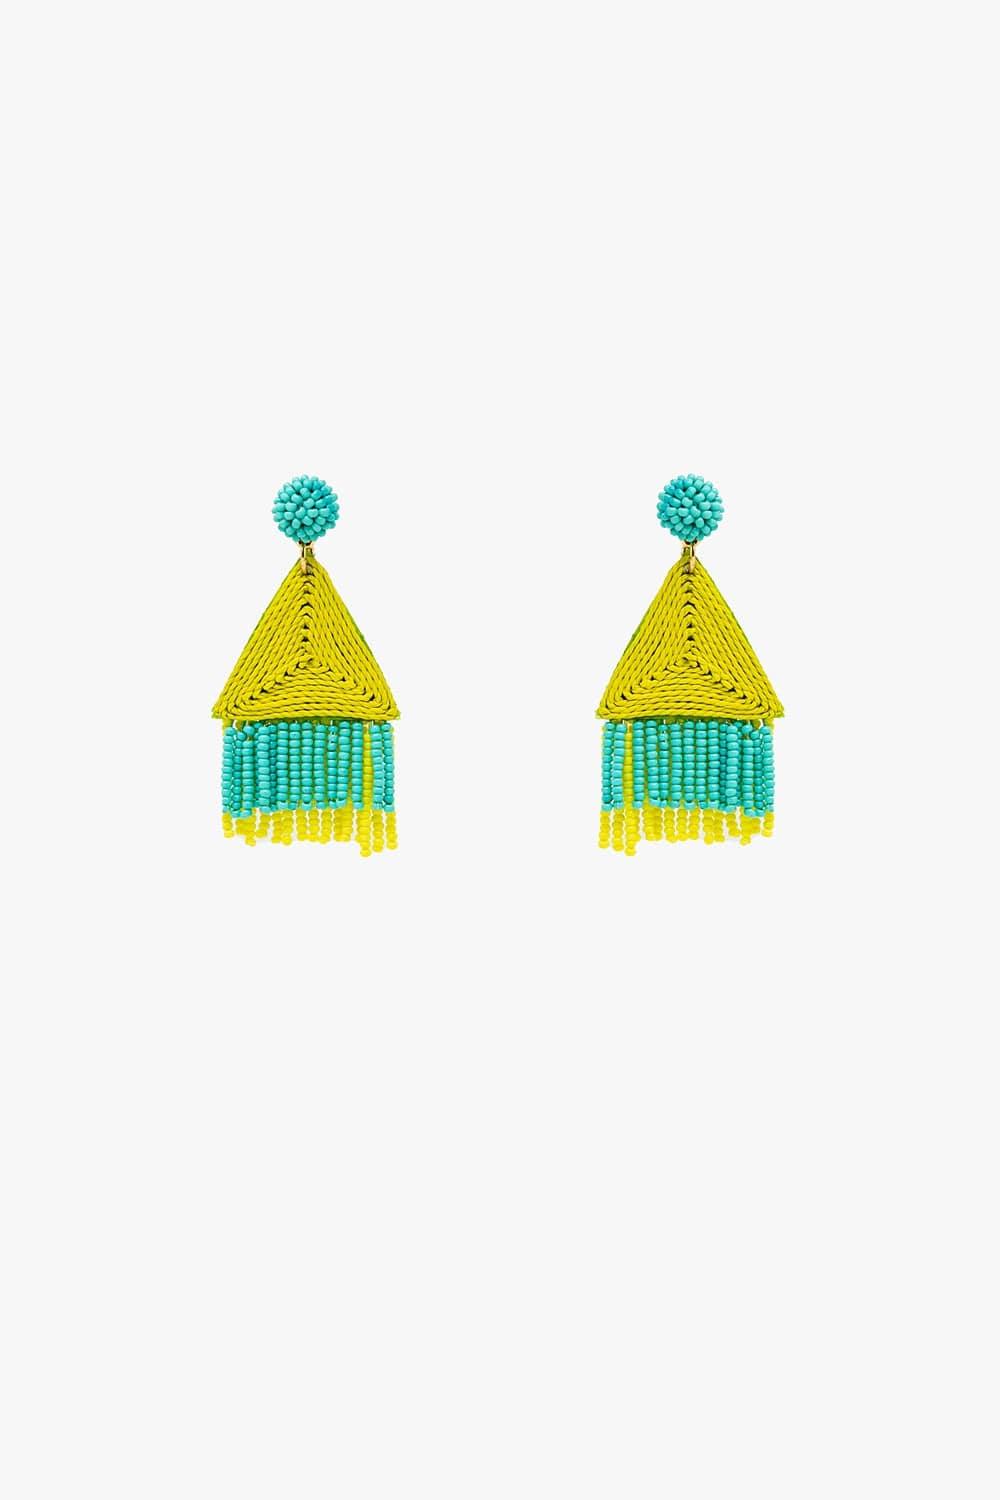 Q2 Women's Earrings One Size / Green Turquoise Drop Earings With Lime Pyramid And Fringe